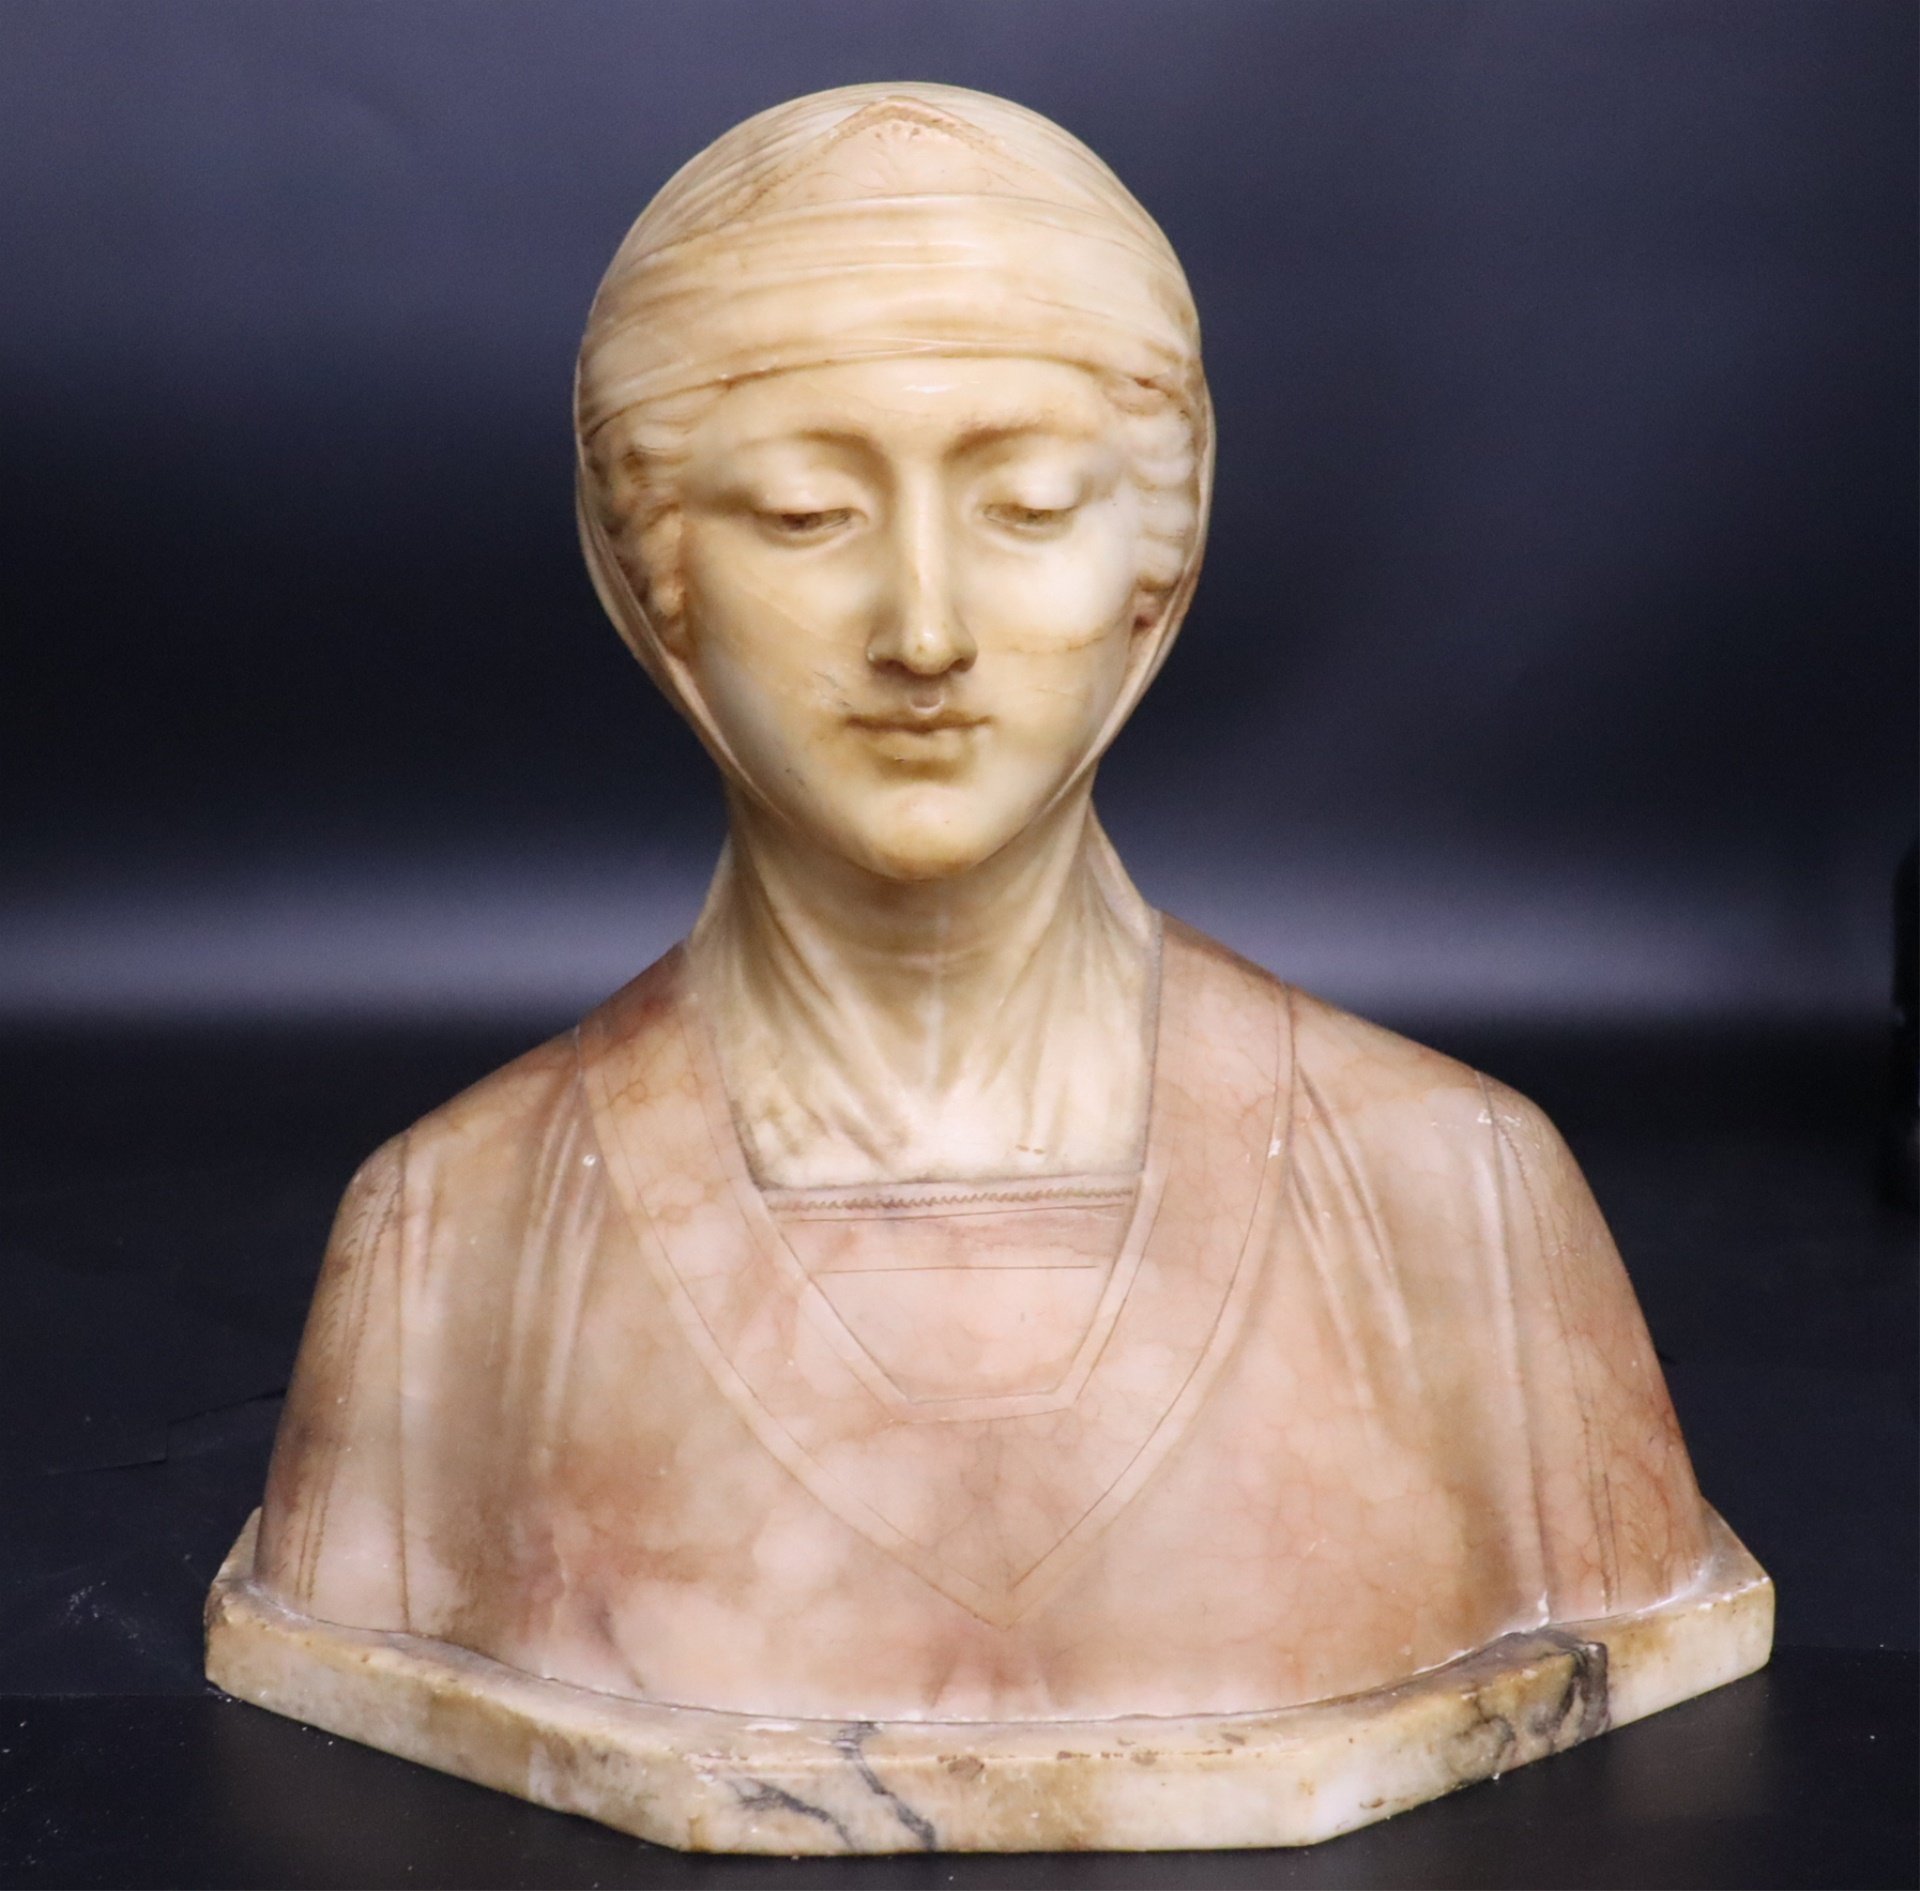 A LARGE ALABASTER BUST OF BEATRICE